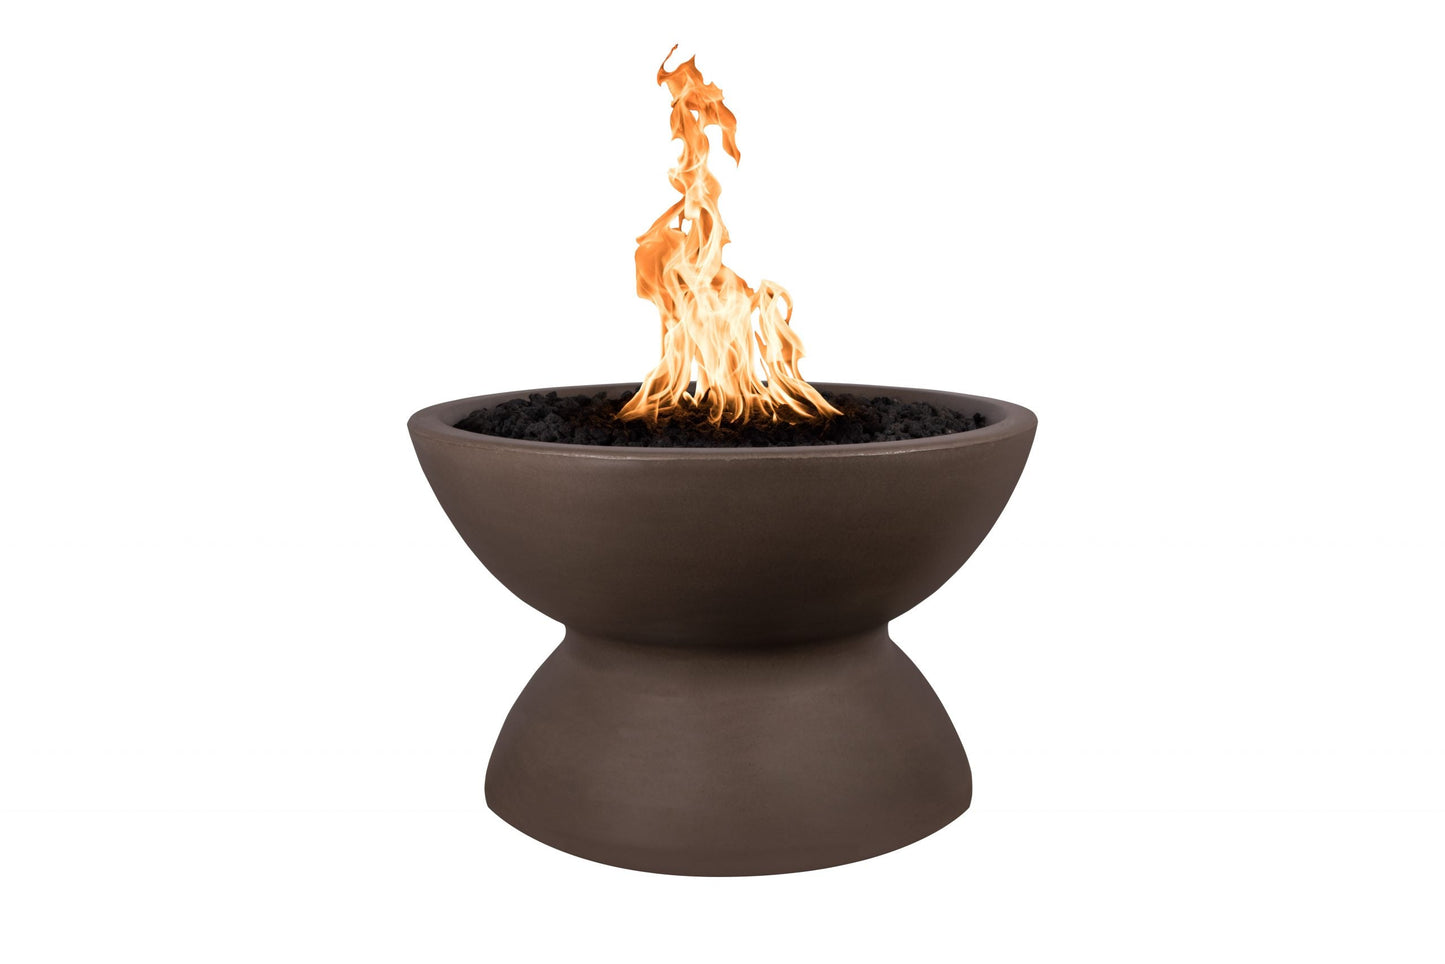 The Outdoor Plus Round Copa 33" Rustic Moss Stone GFRC Concrete Liquid Propane Fire Pit with 110V Electronic Ignition